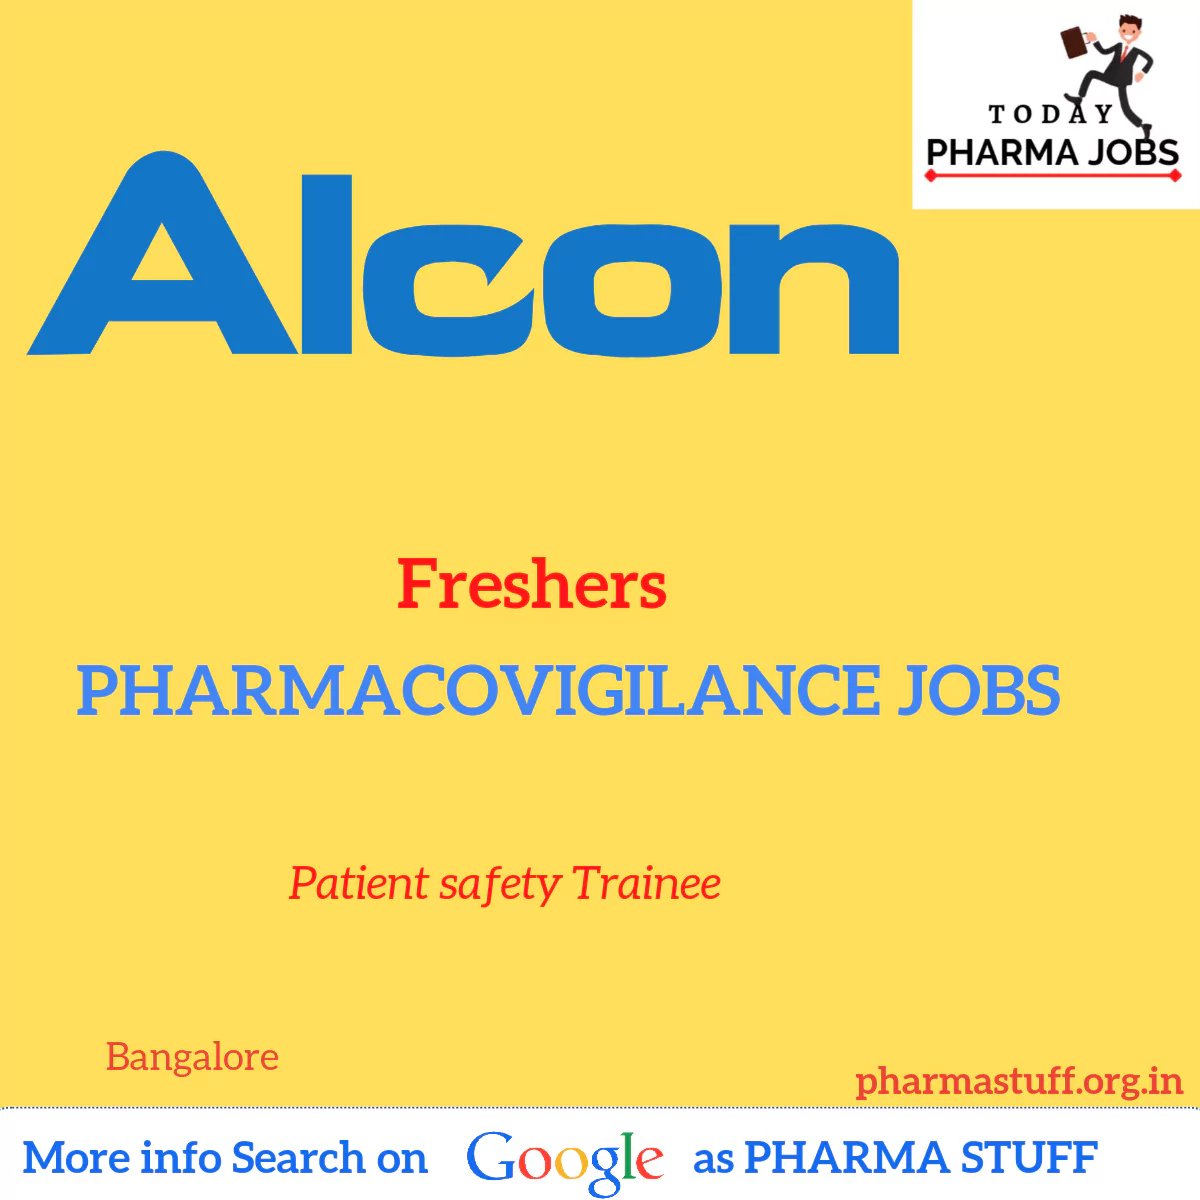 %titl fresher pharmacovigilance jobs at bangalore patient safety2484577761195968779